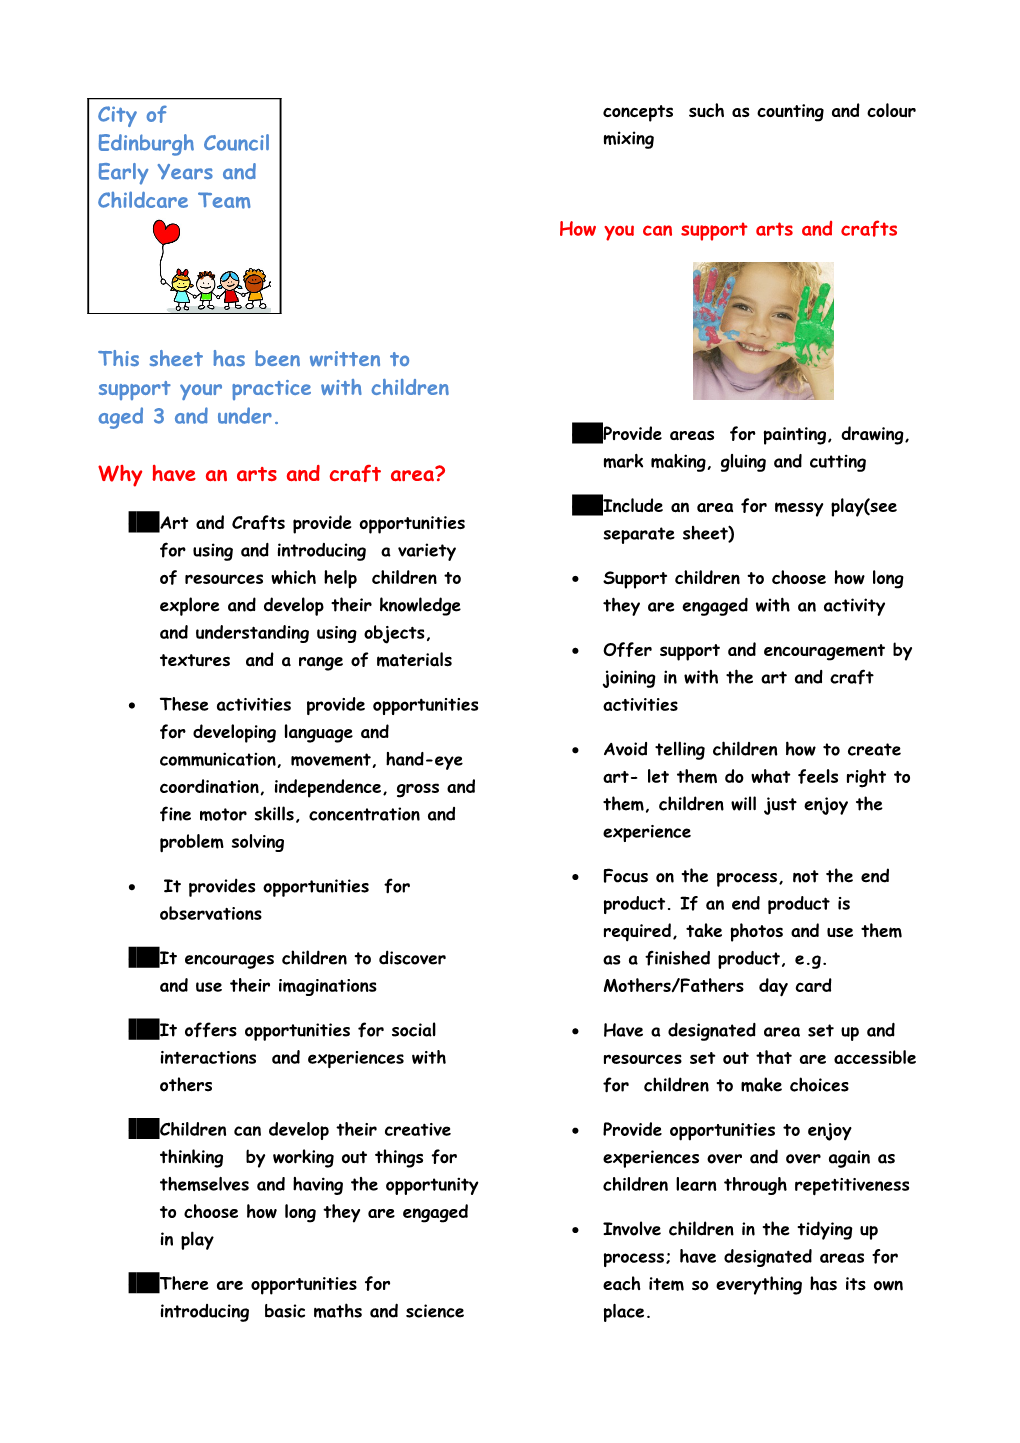 This Sheet Has Been Written to Support Your Practice with Children Aged 3 and Under